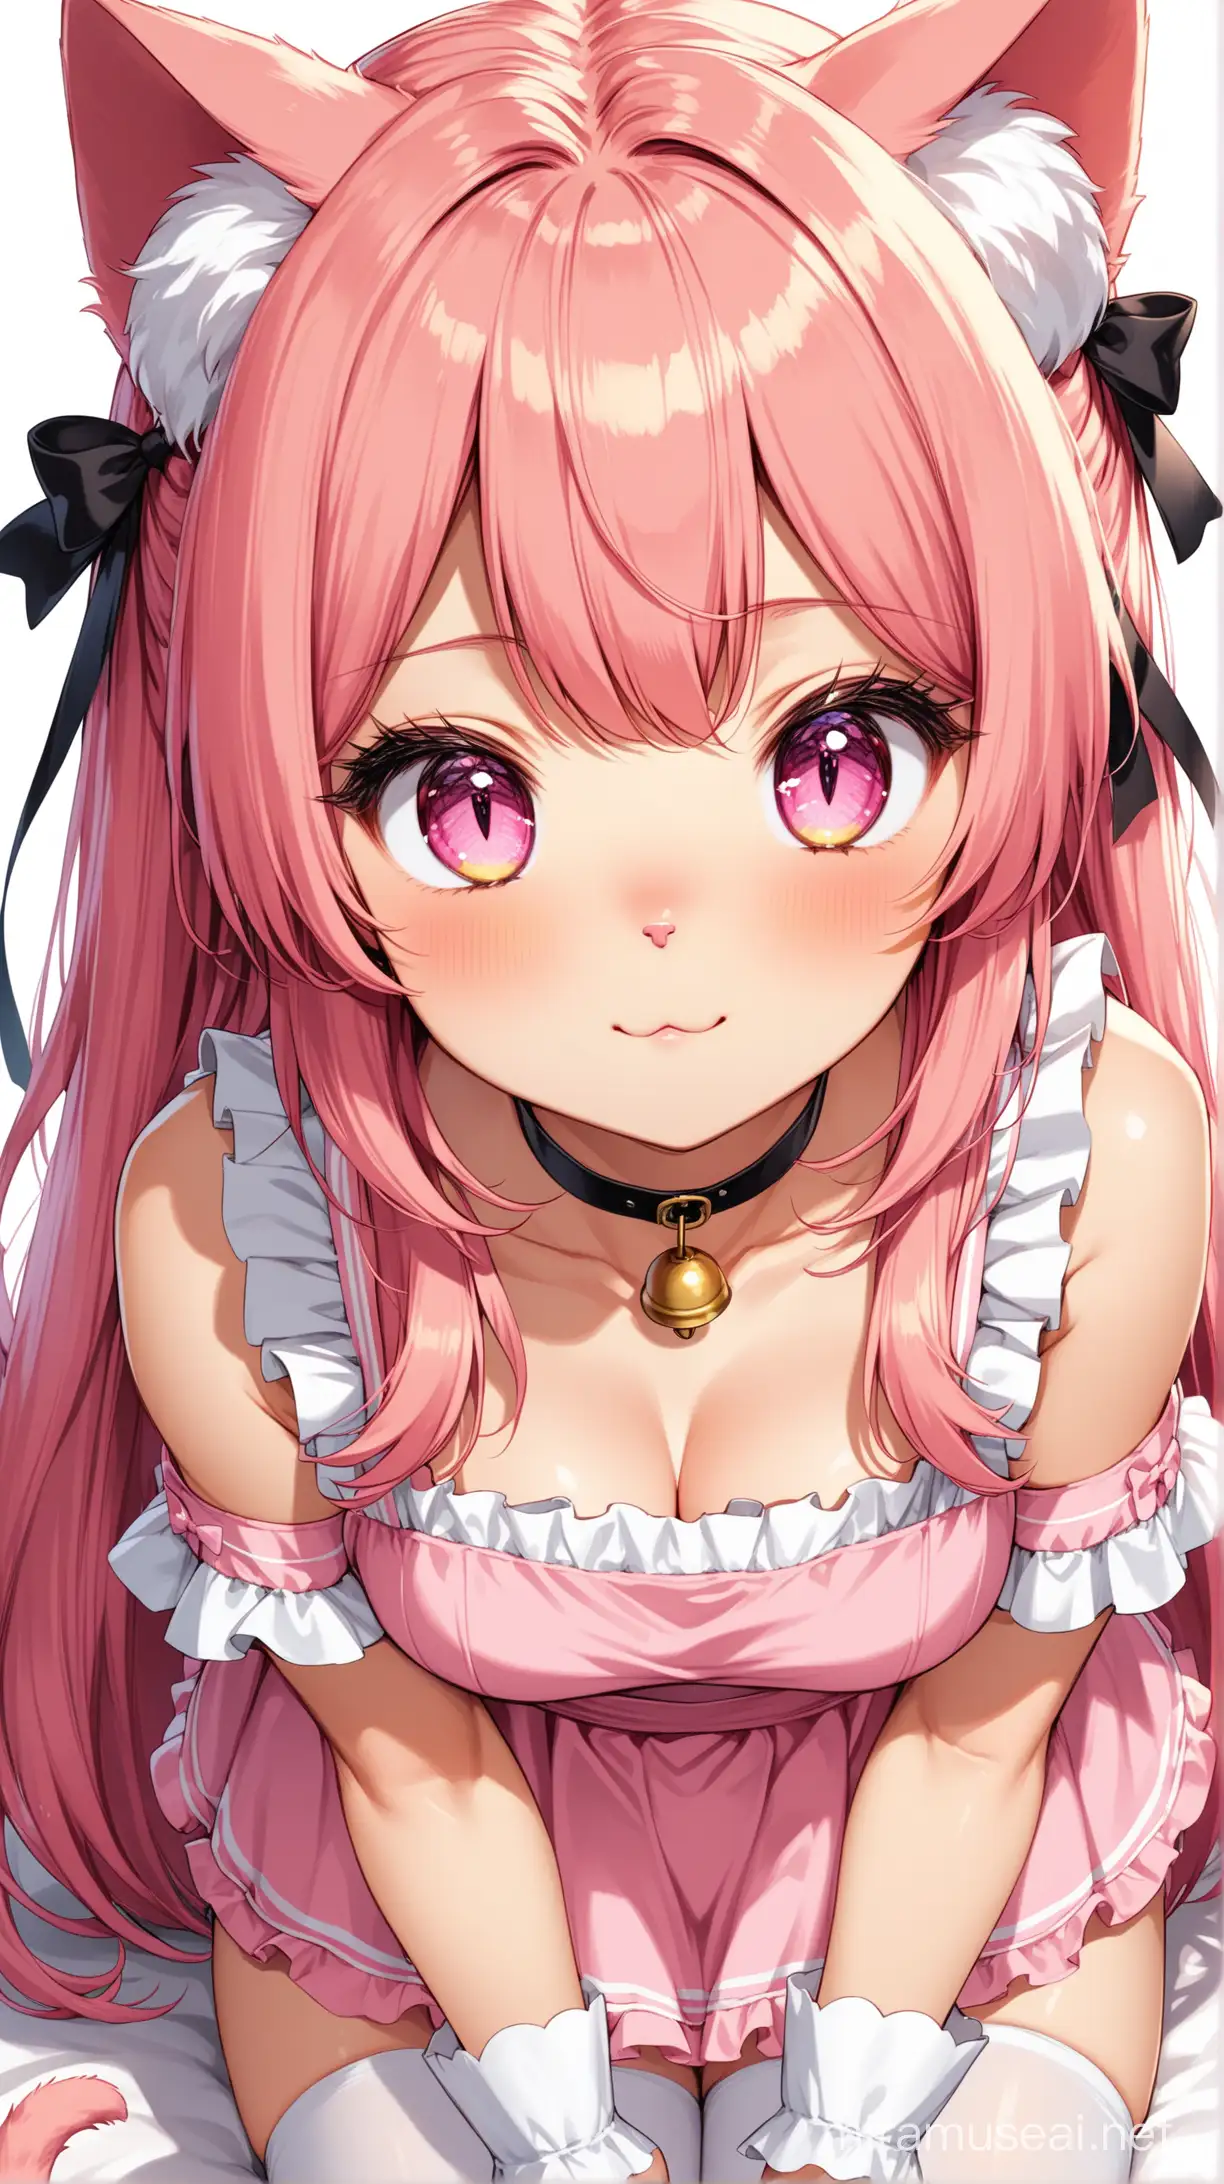 Kawaii Nyandere Cat Girl in Pink Maid Uniform Receives Headpat HighQuality Anime Illustration